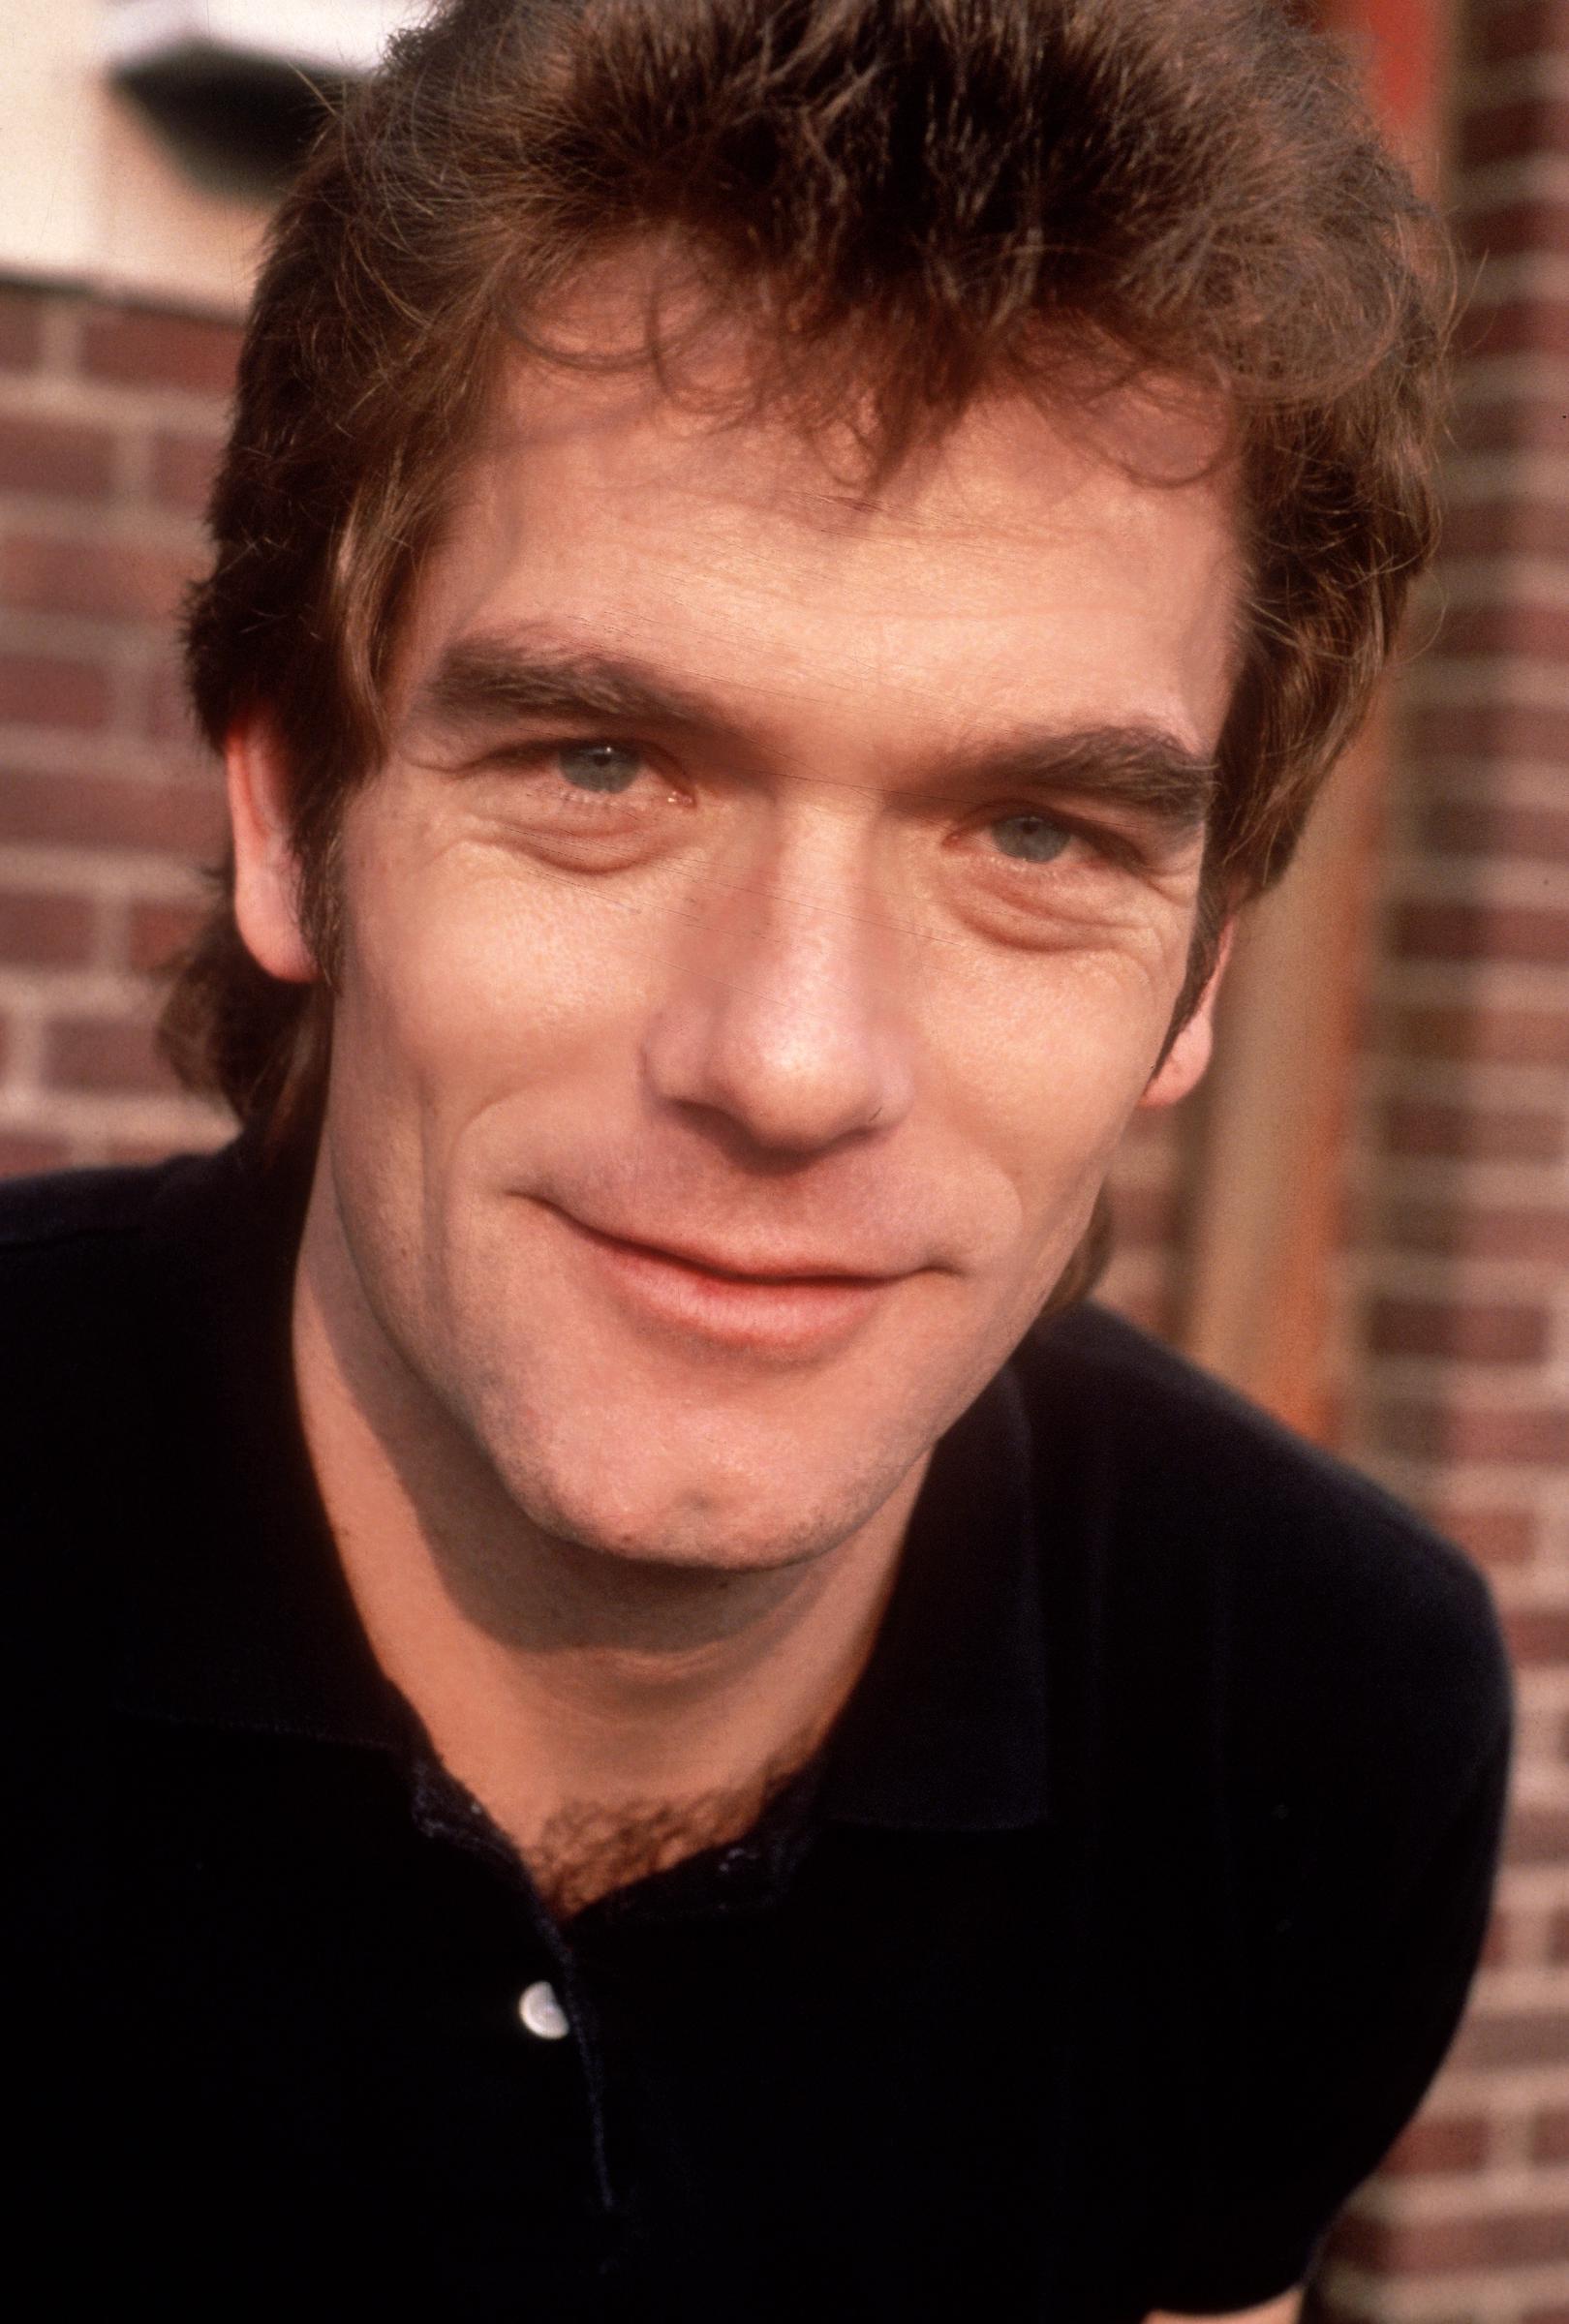 Huey Lewis circa 1979 in New York City. | Source: Getty Images